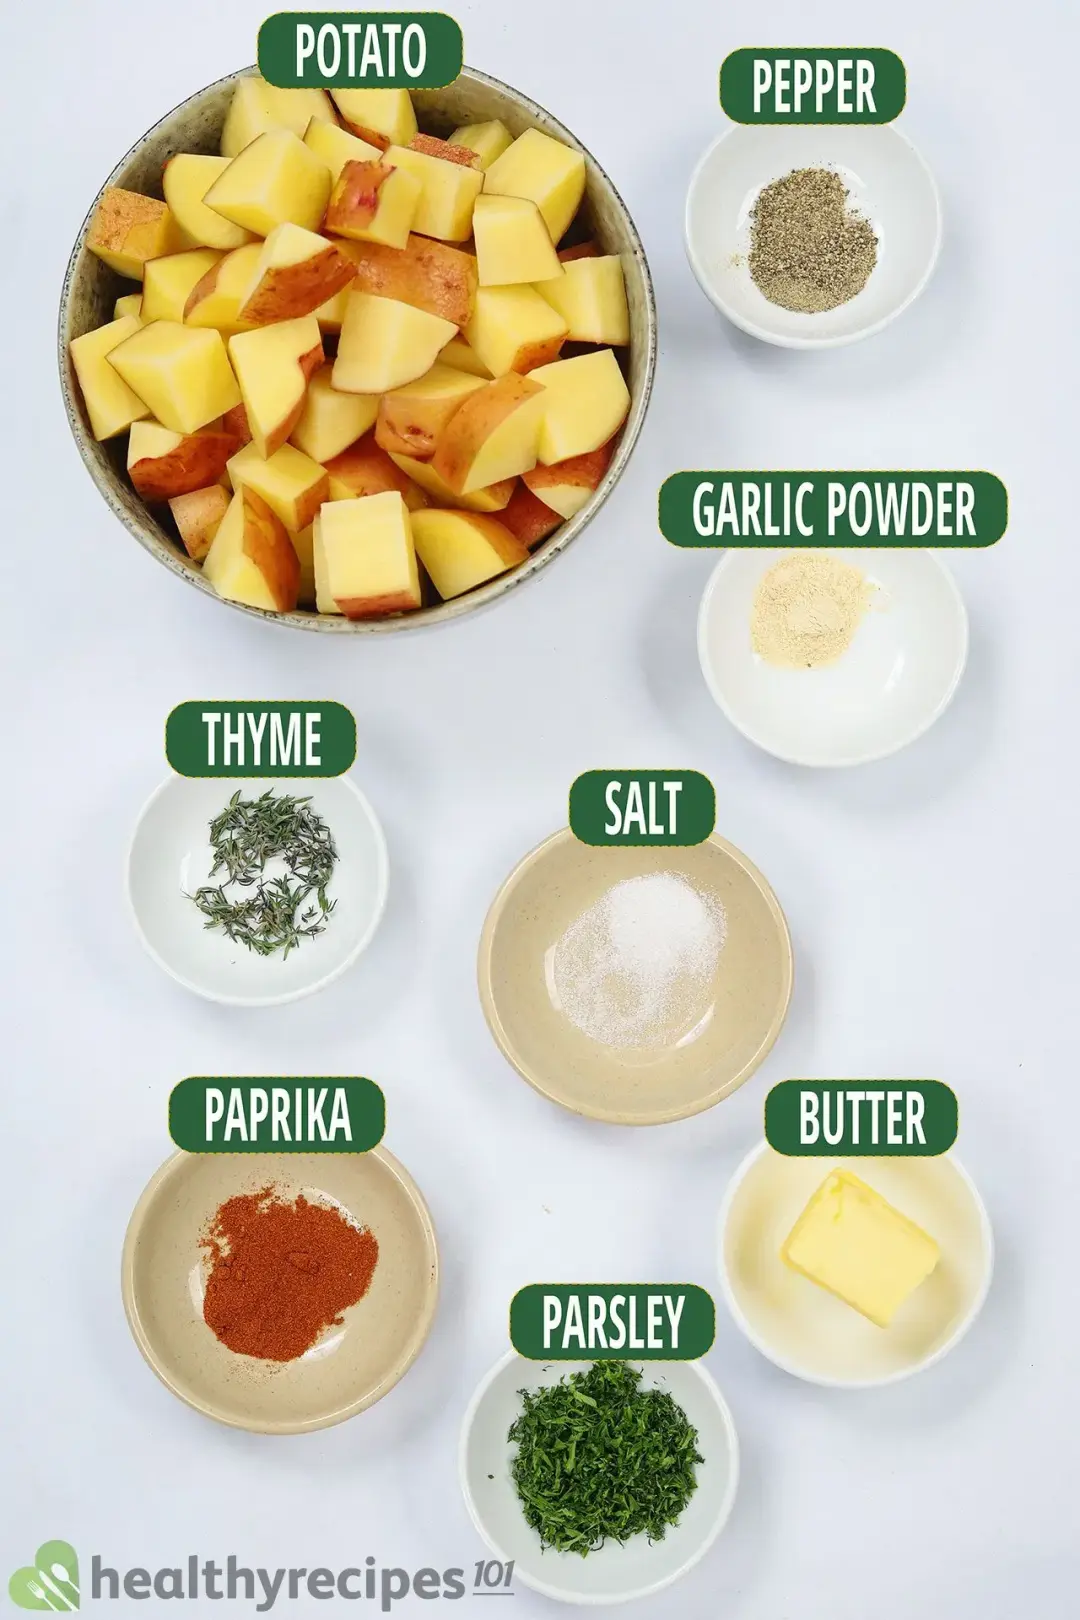 Ingredients for Roasted Potatoes